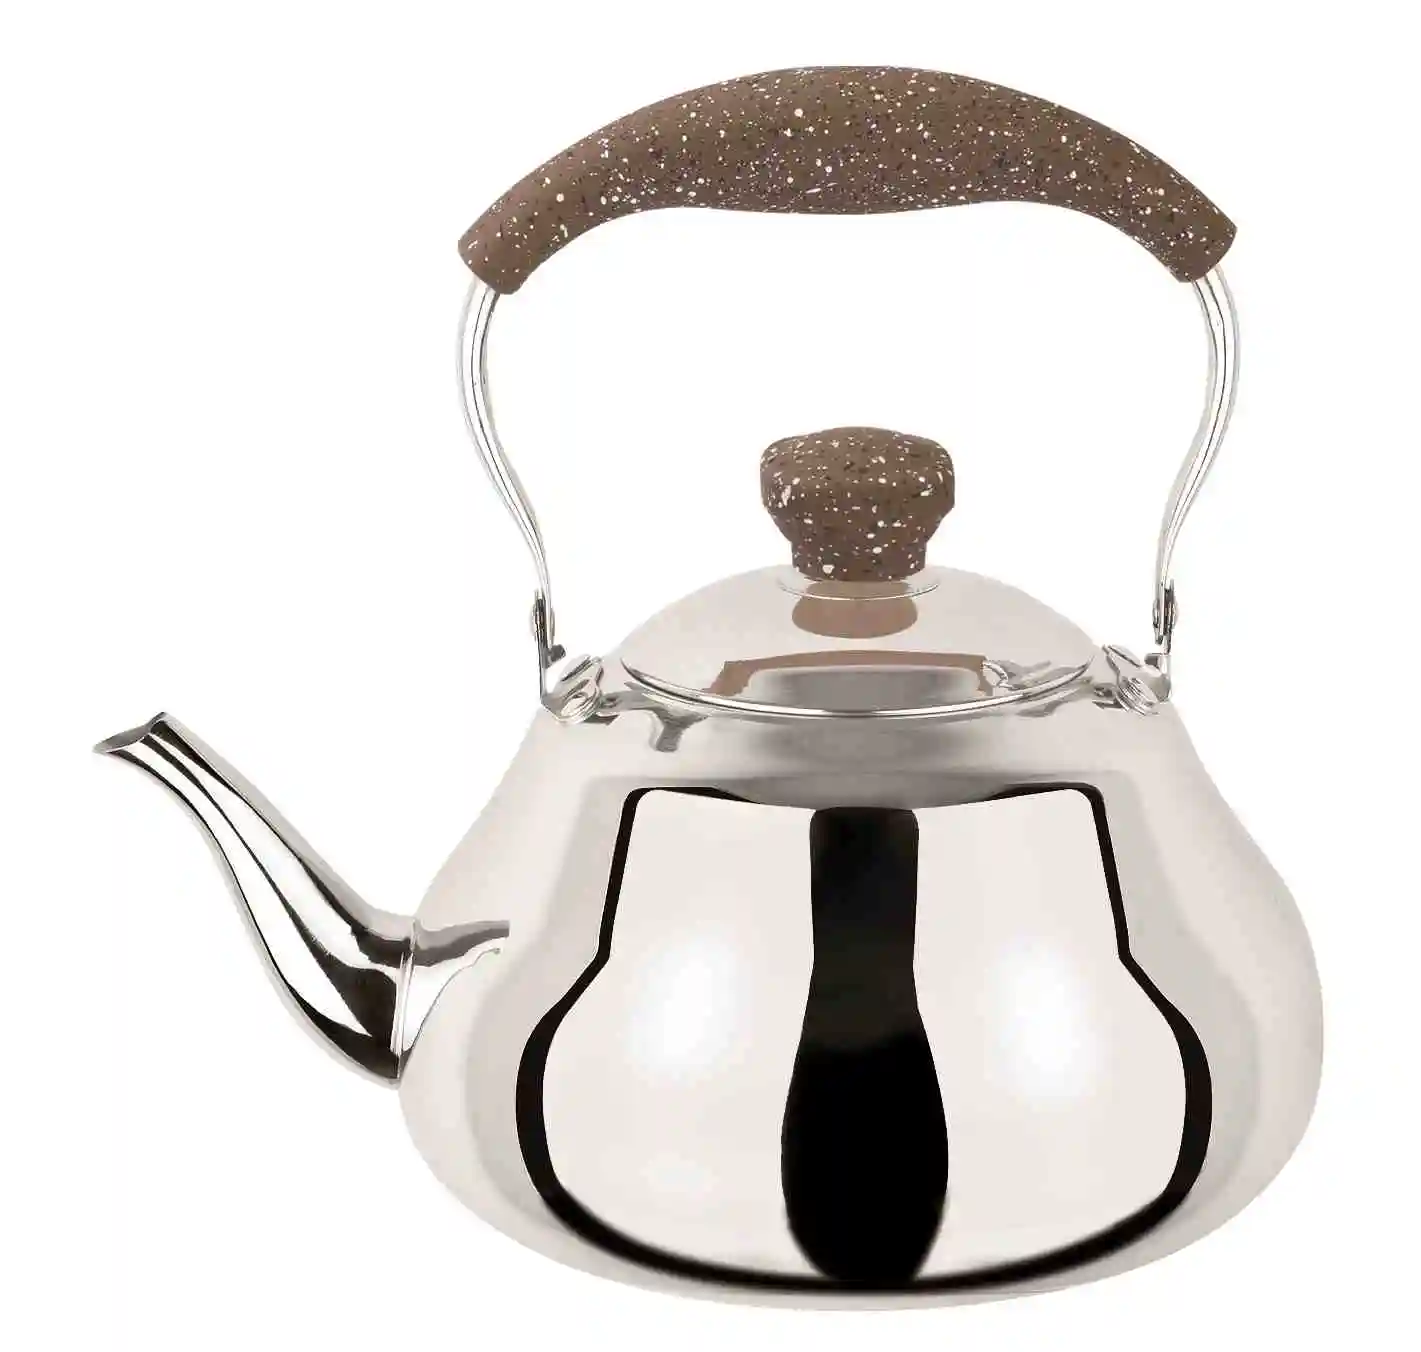 L23010203-C2 Fashion design Good Quality stainless steel whistling tea kettle unique tea kettles with Marble Color Handle